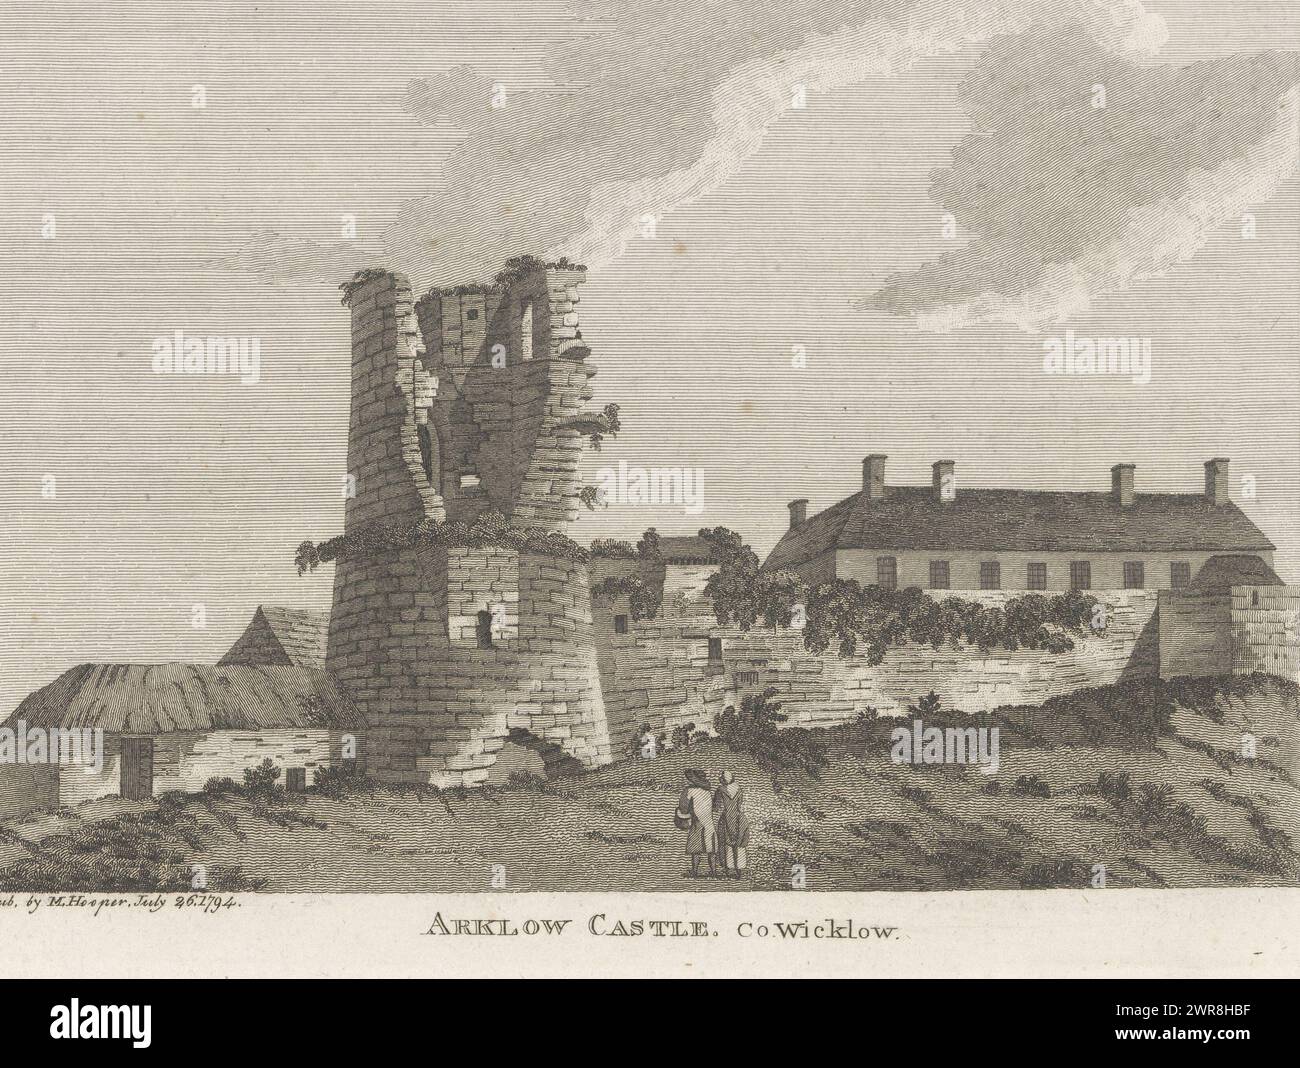 View of the ruins of Arklow Castle, Arklow Castle. Co.Wicklow (title on object), This print is part of a book., print maker: anonymous, publisher: M. Hooper, London, 26-Jul-1794, paper, etching, height 152 mm × width 200 mm, print Stock Photo